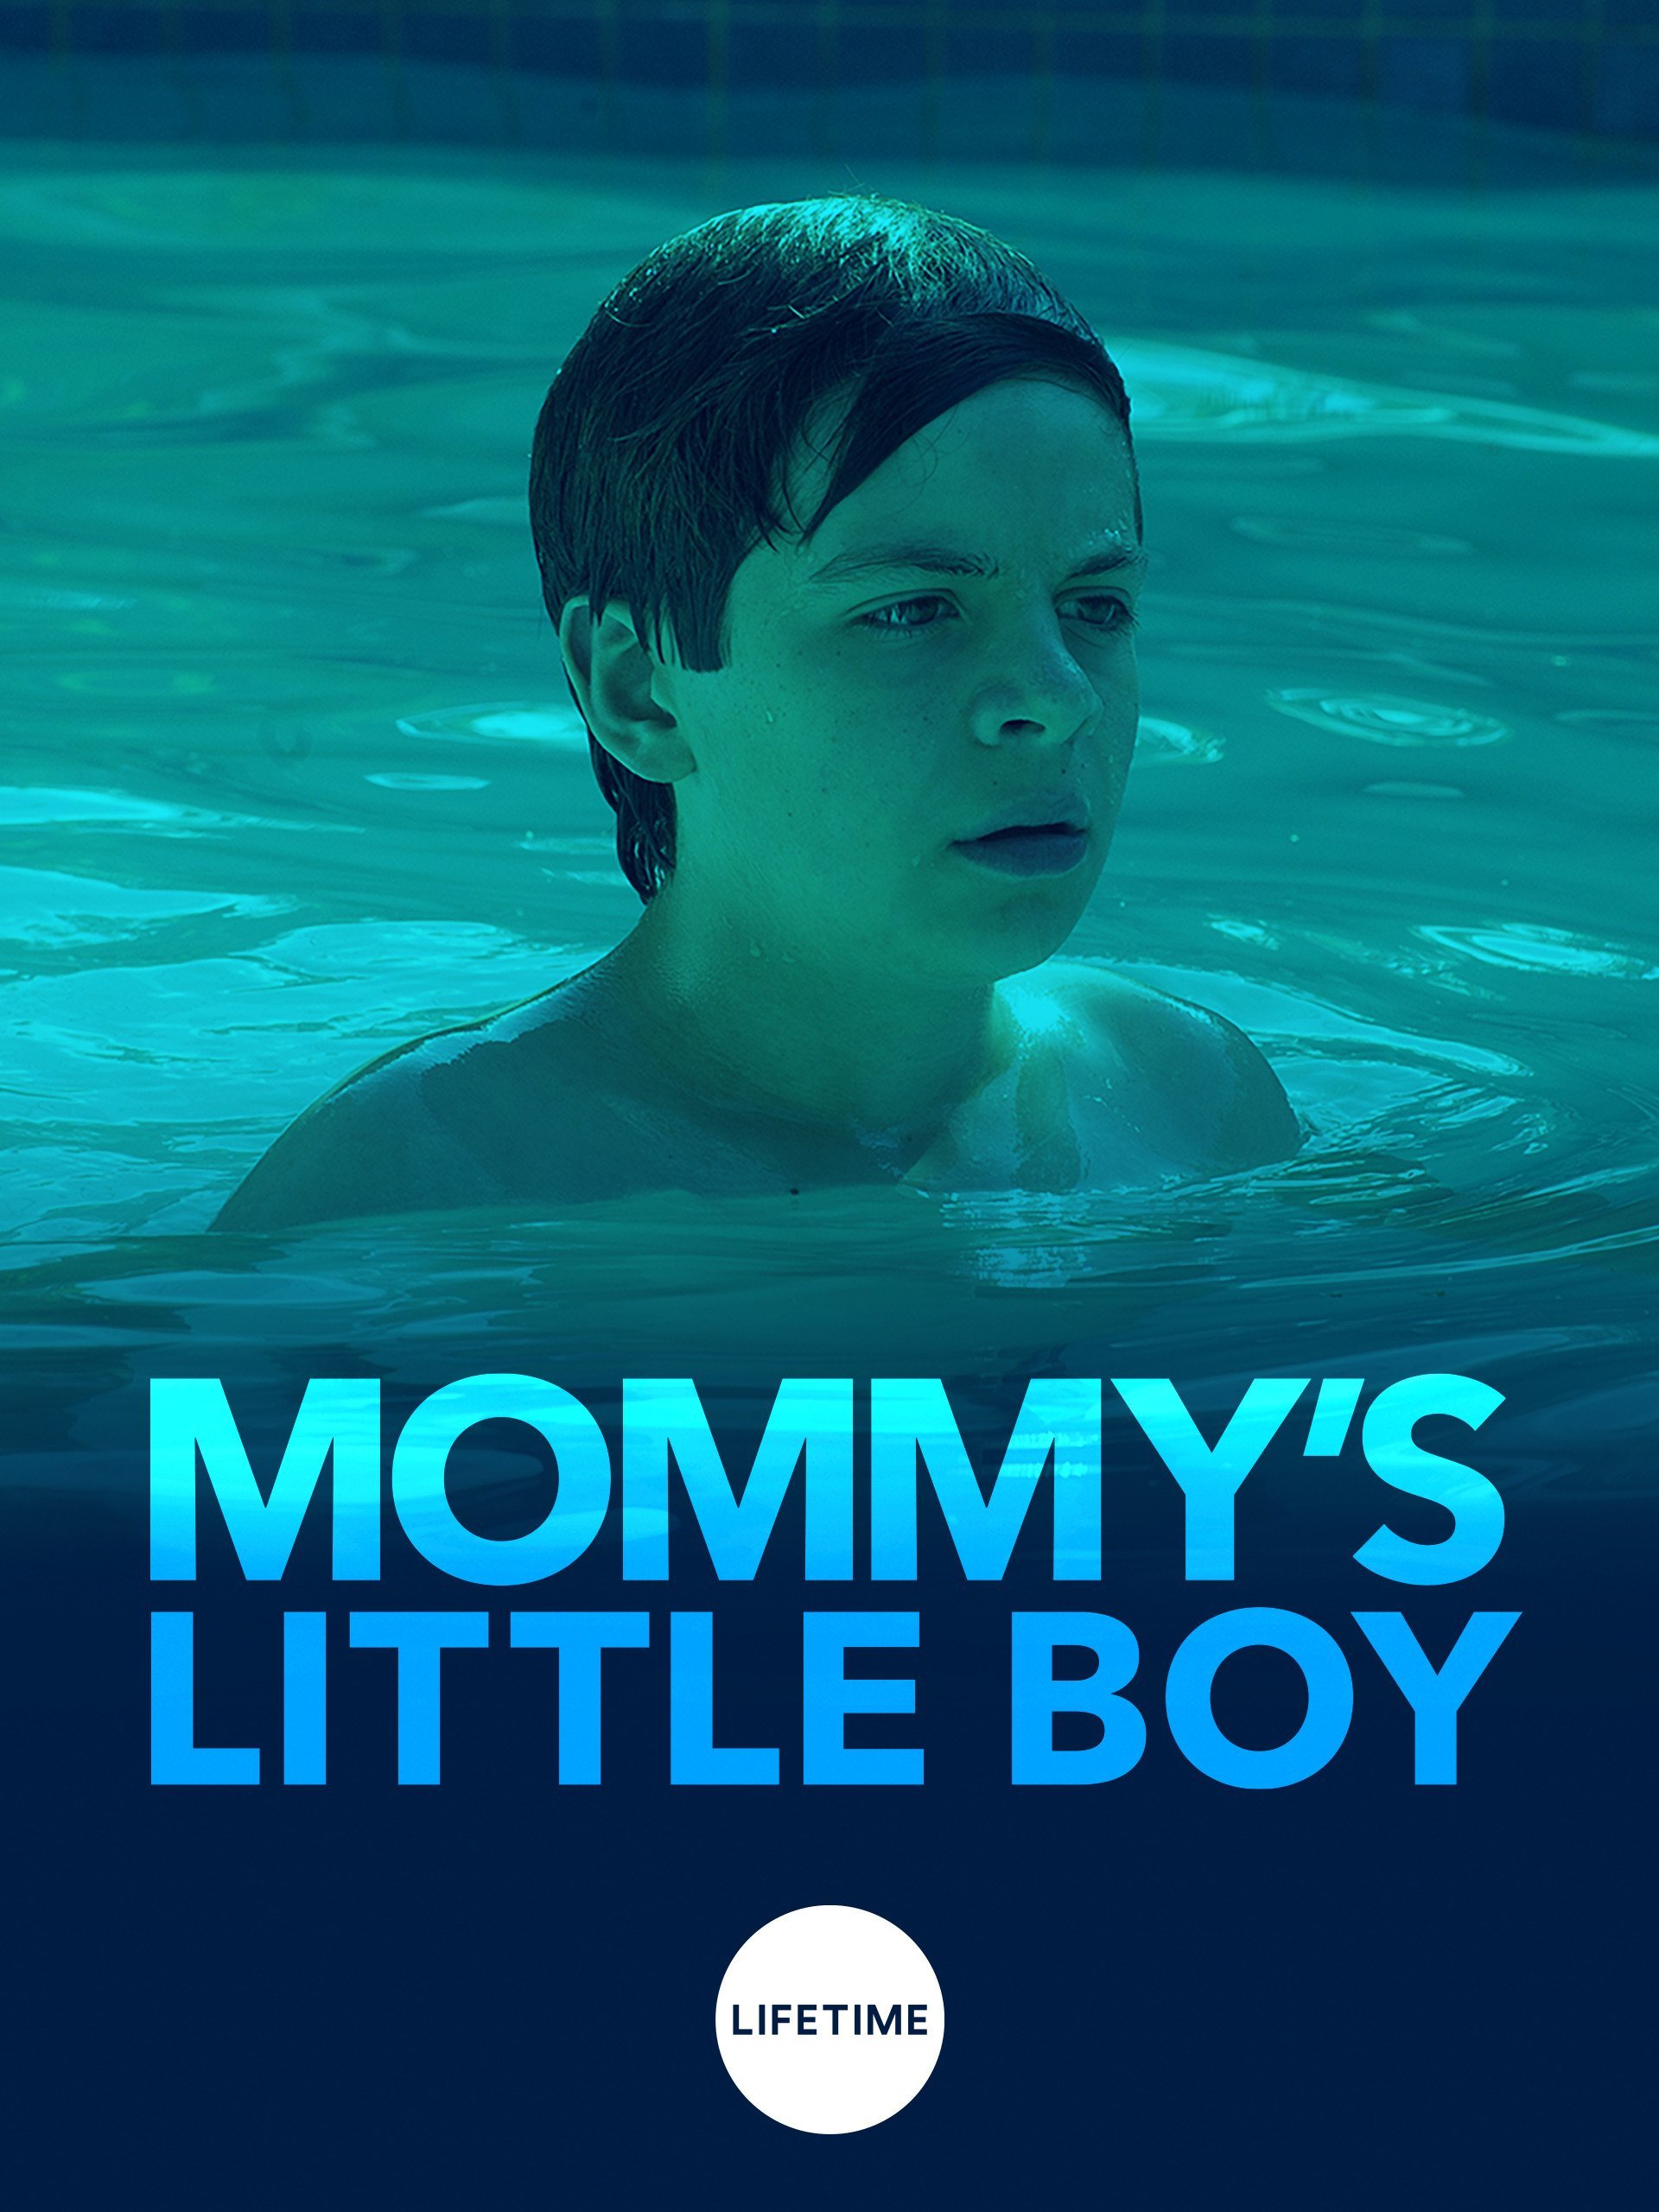 Mommy movies. Питер ДАКУНА. Mommy's boy. Питер ДАКУНА без майки. Mommy's petboy.